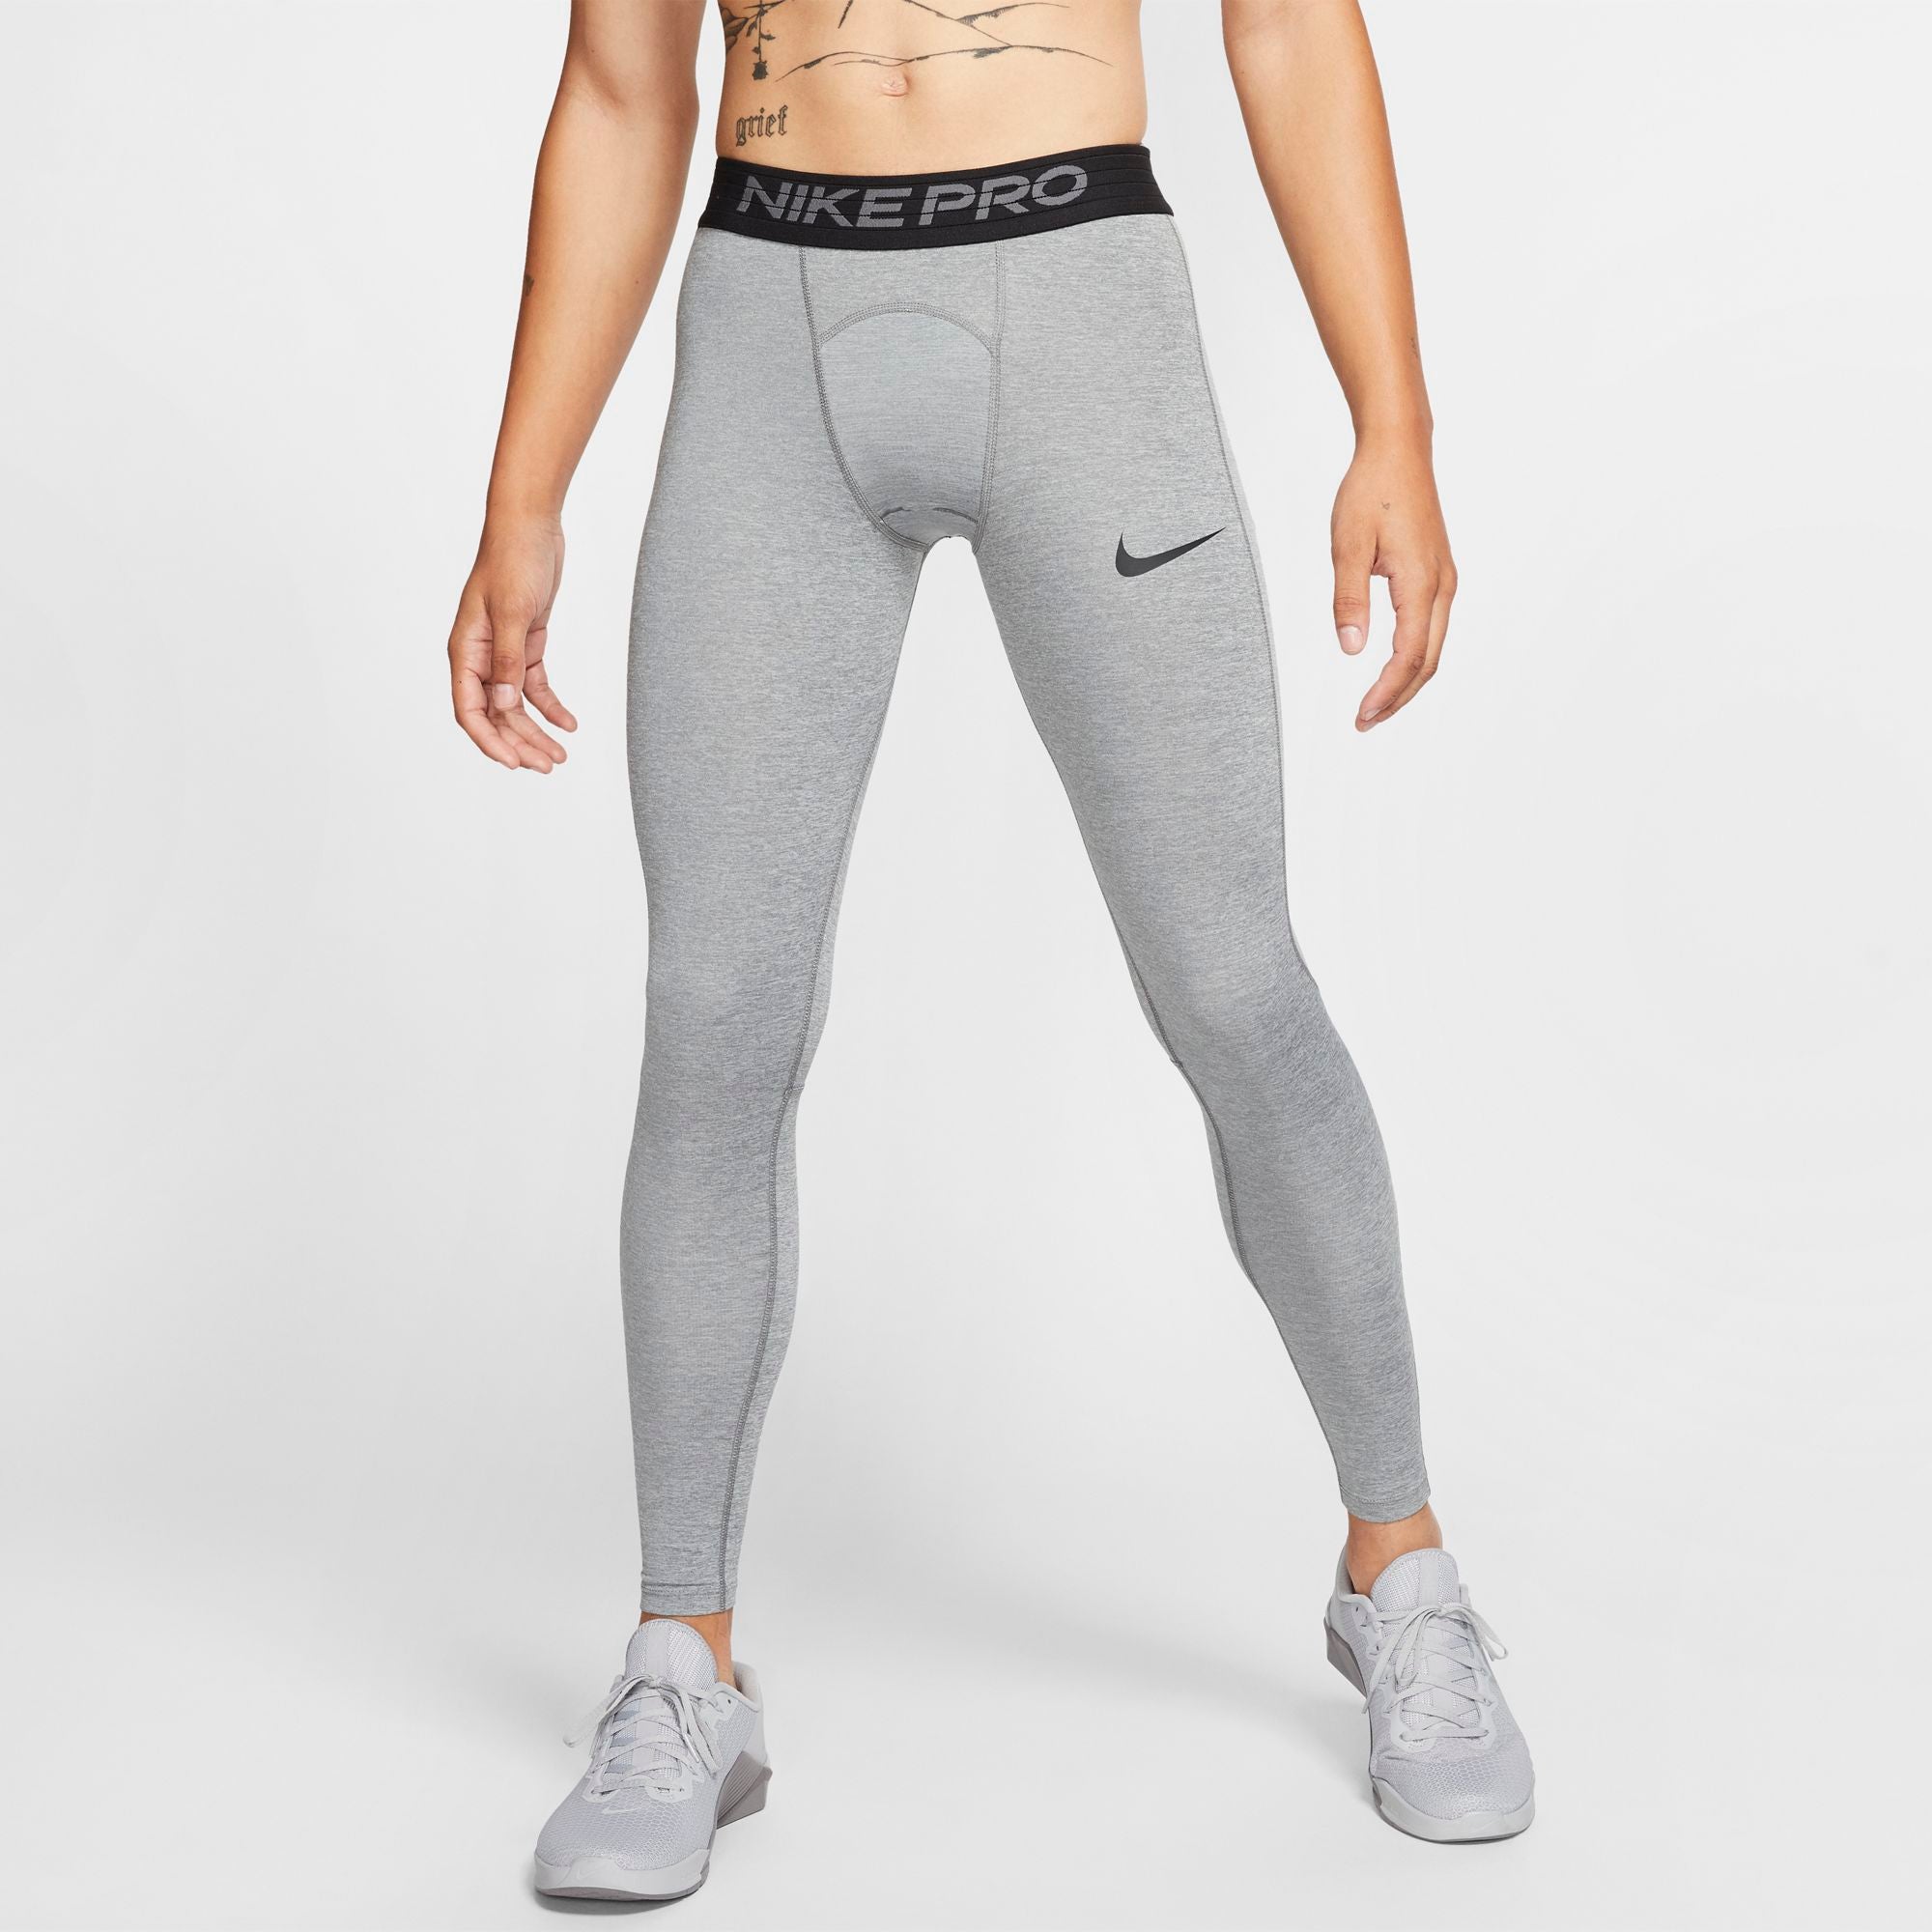 Nike Pro Swoosh Compression Tights & Reviews